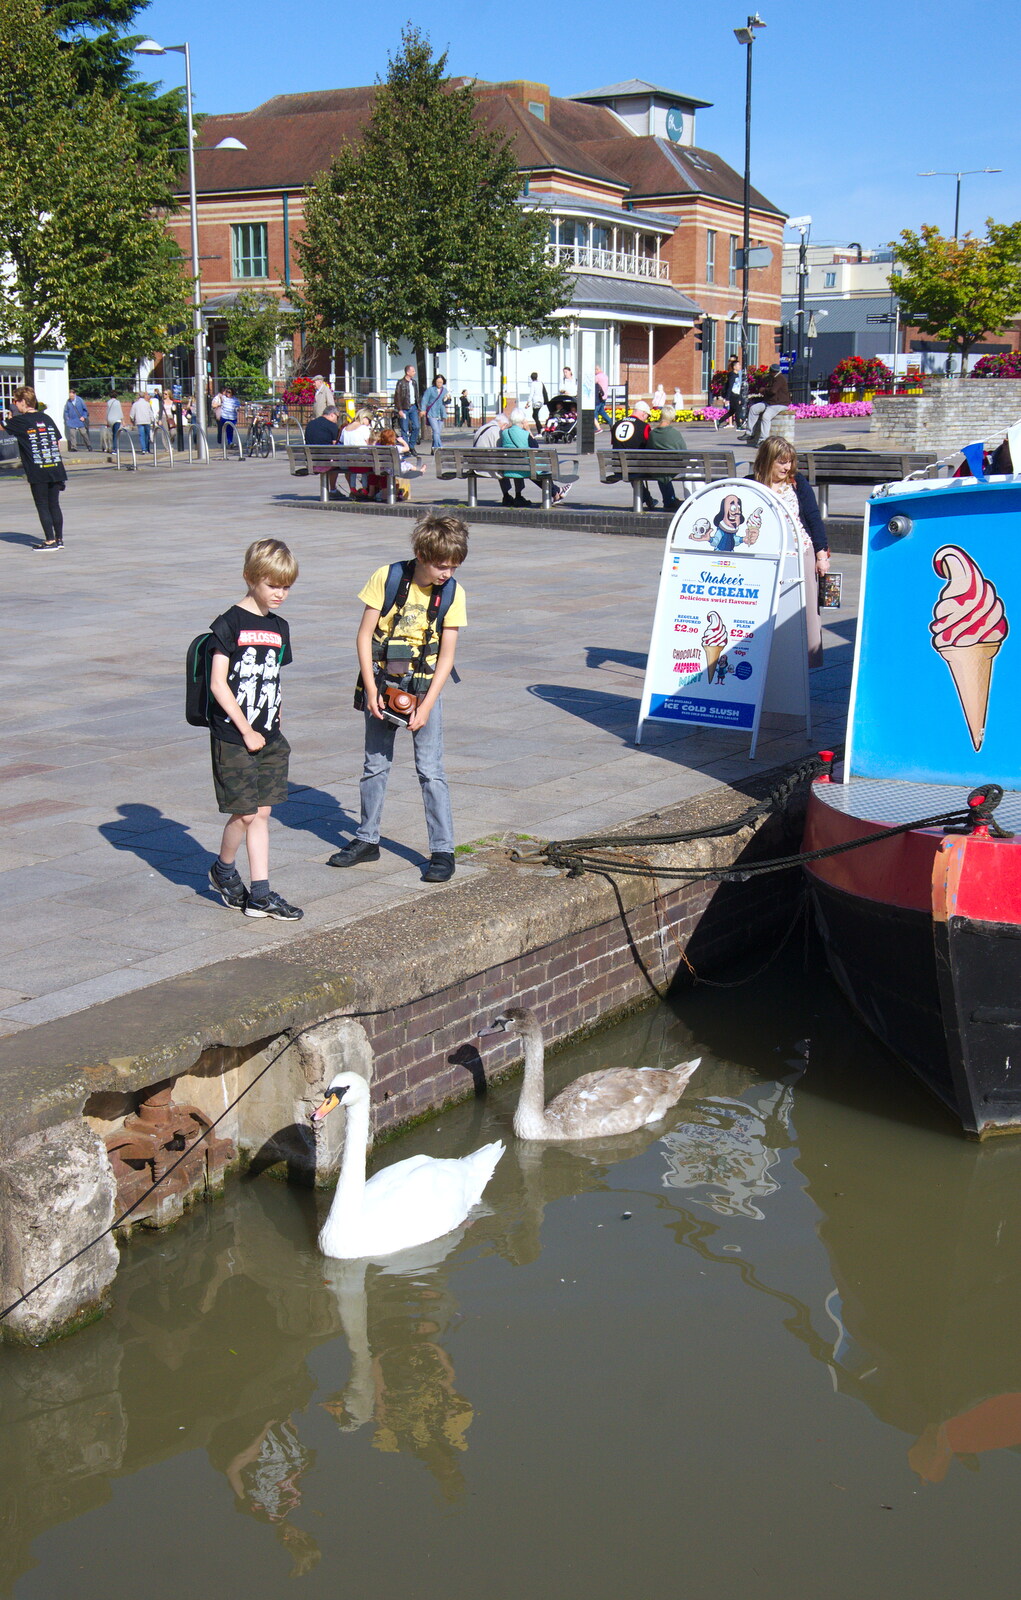 Harry and Fred face off with a couple of swans from A Boat Trip on the River, Stratford upon Avon, Warwickshire - 14th September 2019